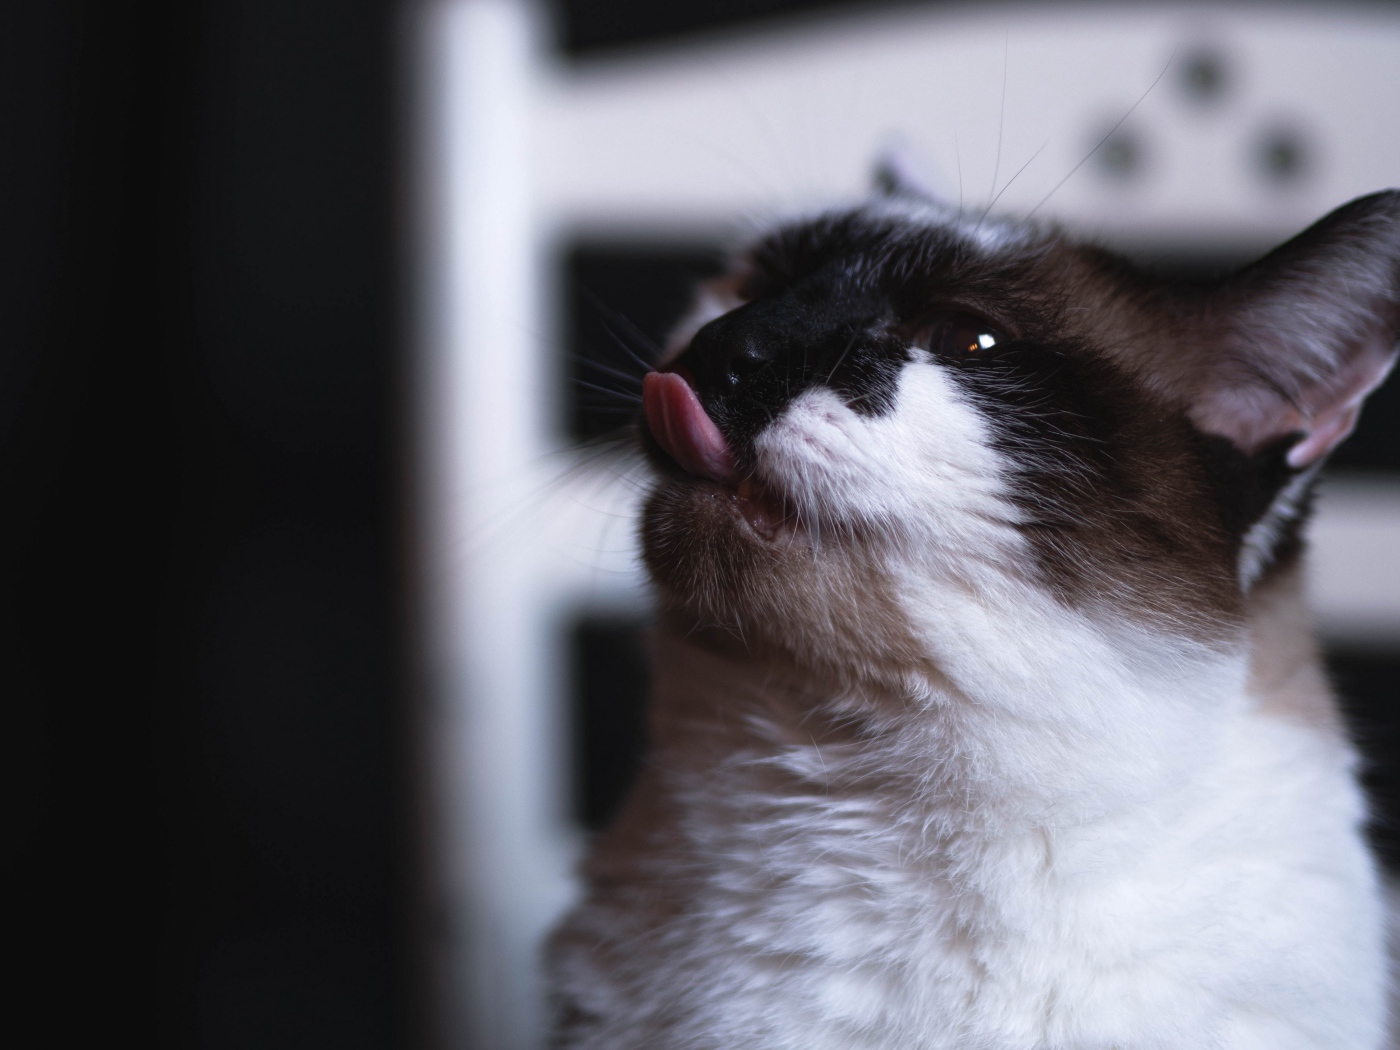 Black and white cat with protruding tongue